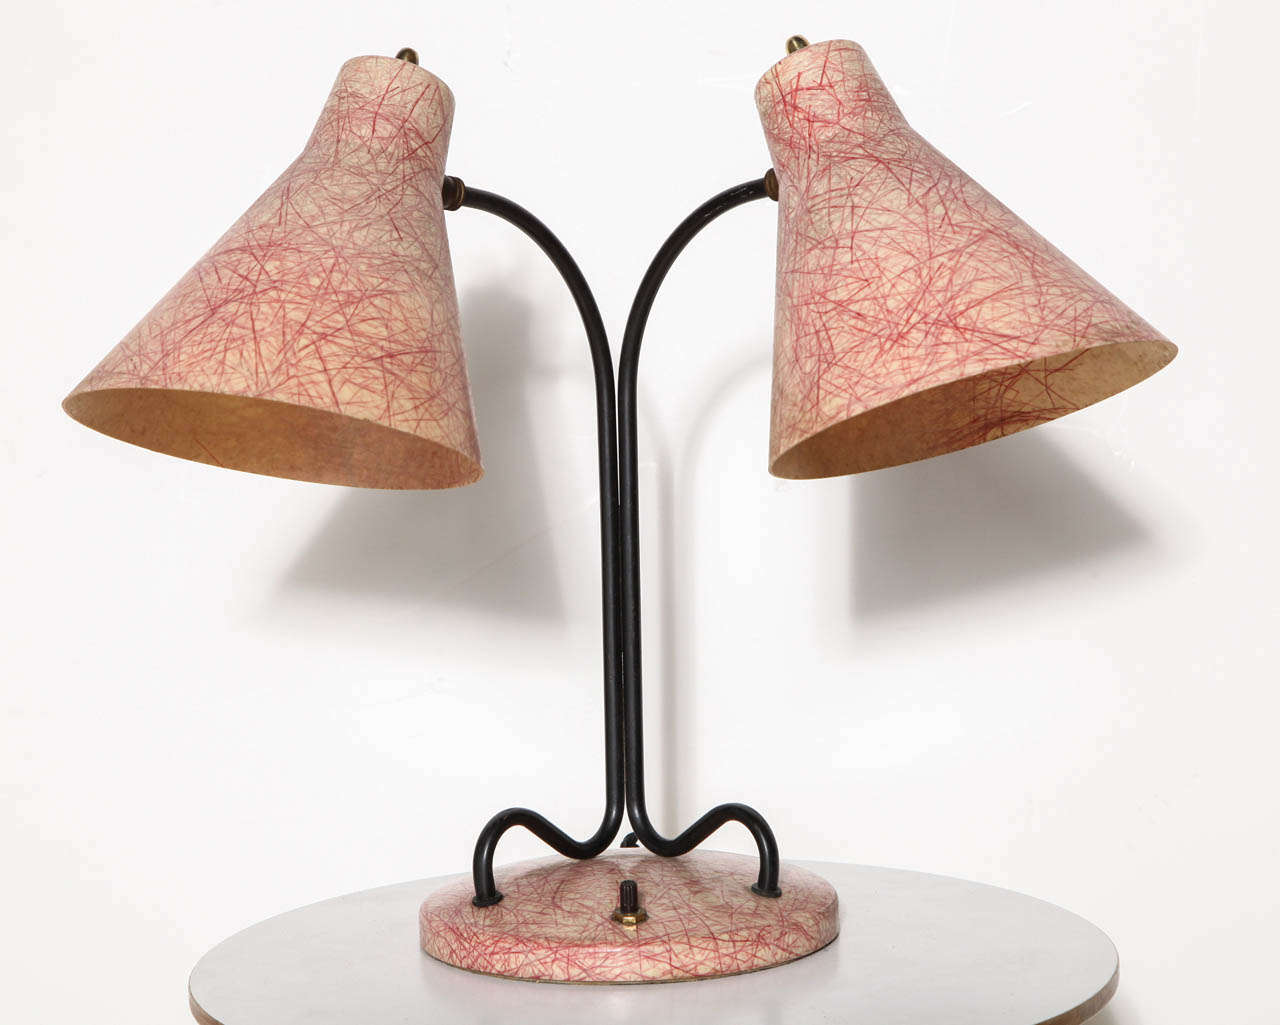 Adjustable Reading Table Lamp with two fiberglass shades in the style of Kurt Versen. Featuring a black enameled loop double stem, ball sockets, perforated, tilting, adjustable double cream with reddish threaded fiberglass shades and round